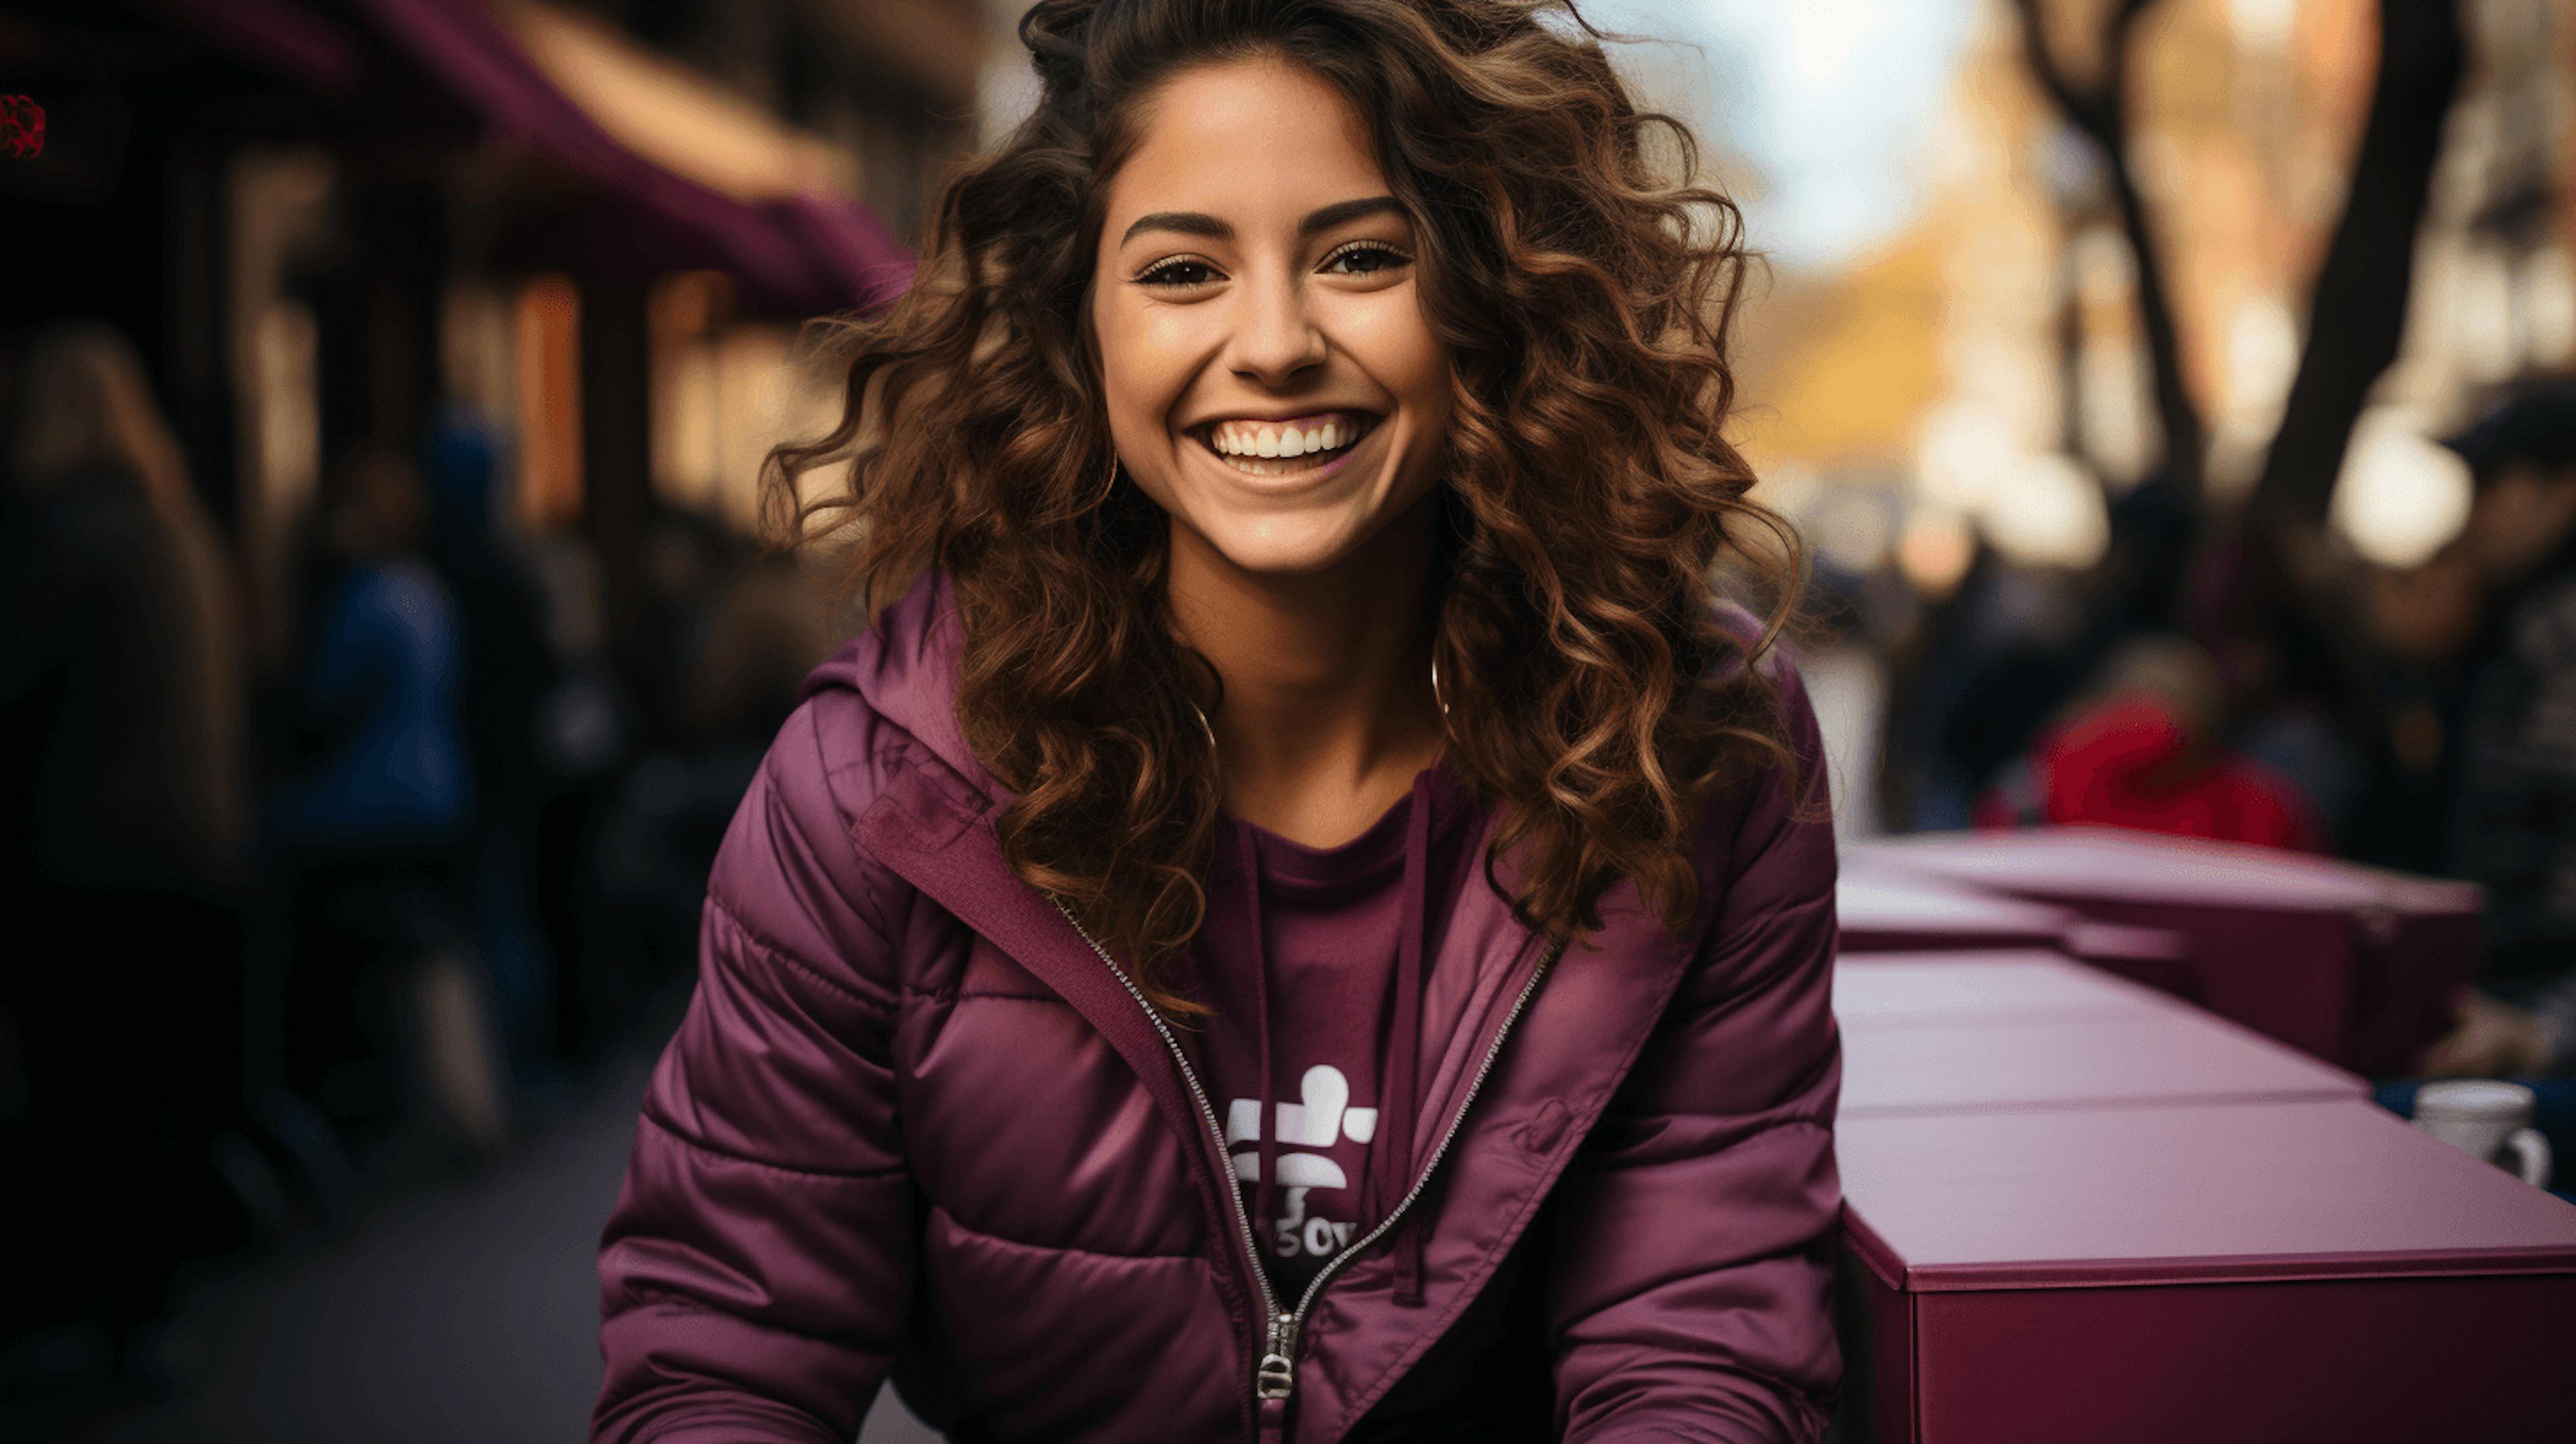 A joyful young woman with curly brown hair smiles brightly, wearing a purple jacket and a shirt with a logo